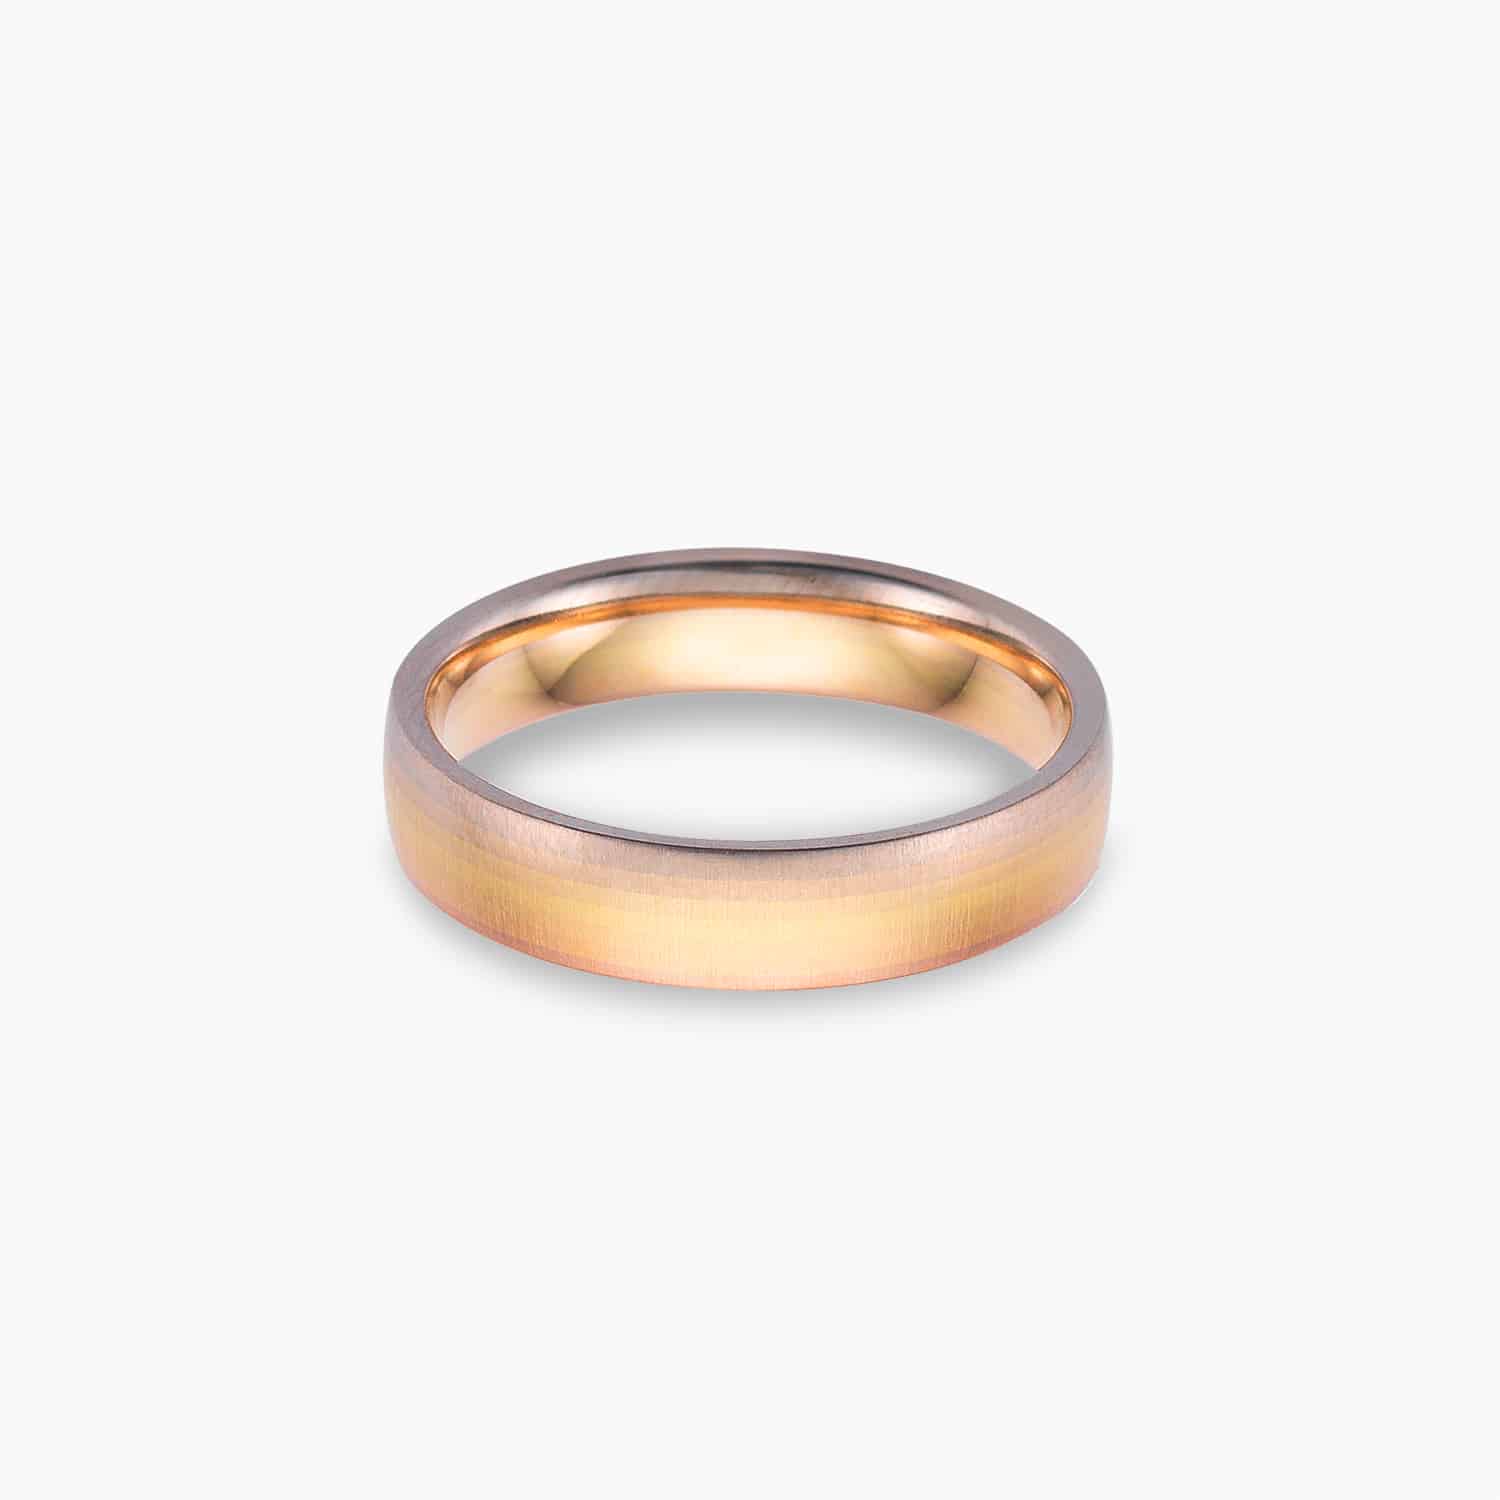 LVC SOLEIL AURORA WEDDING BAND IN THREE GOLD TONES WITH SATIN FINISH a wedding band for men in yellow rose and white gold